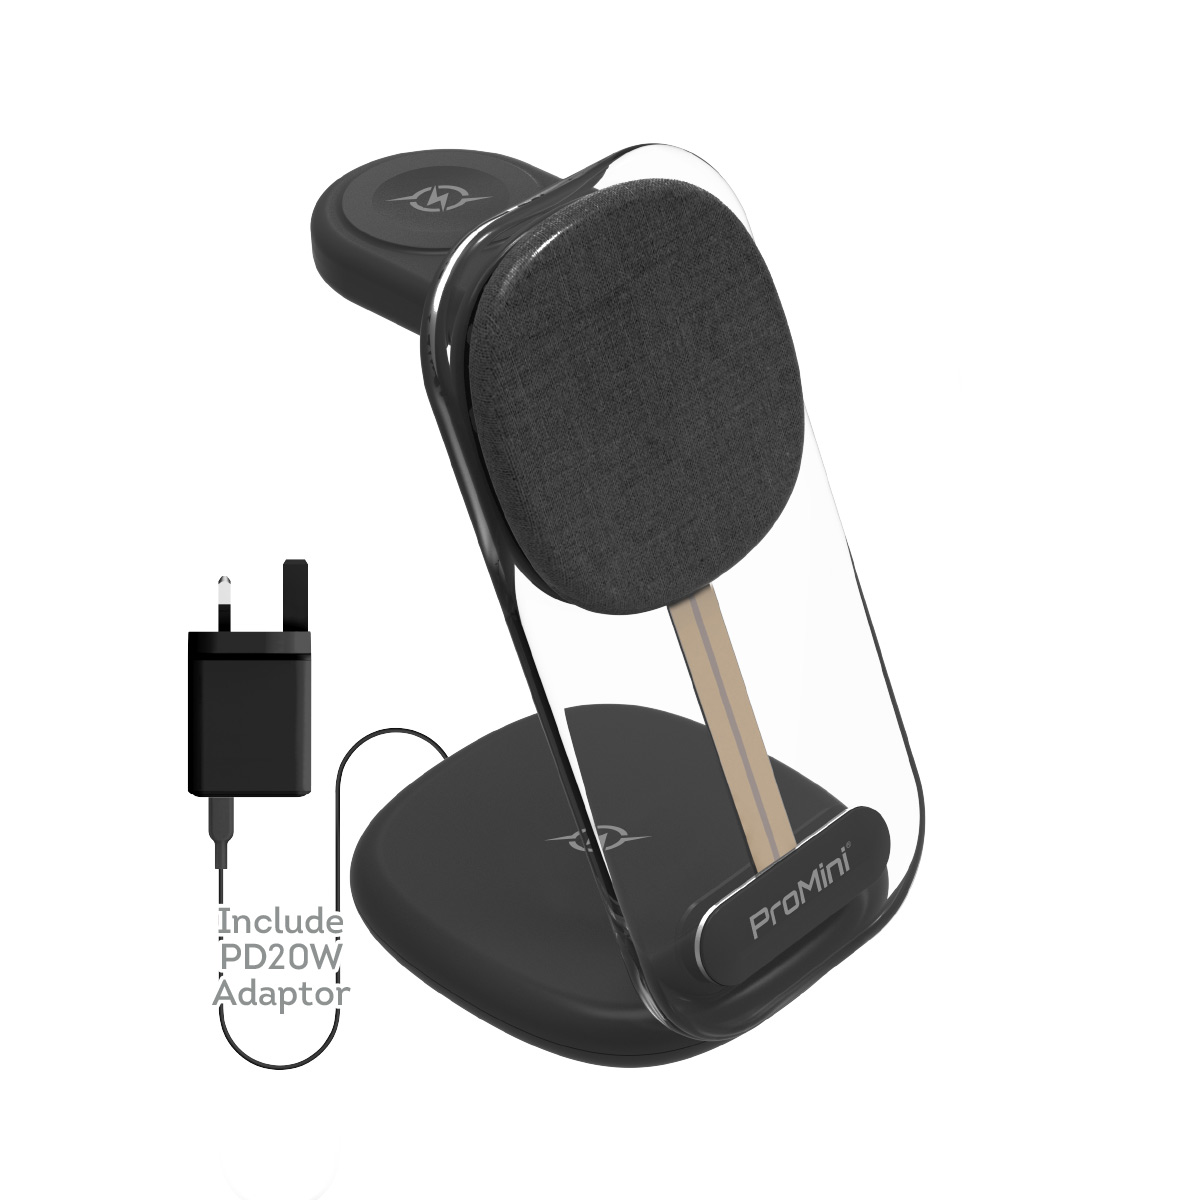 Magic-Pro ProMini Magnetic 3 in 1 Wireless Charger with power adaptor